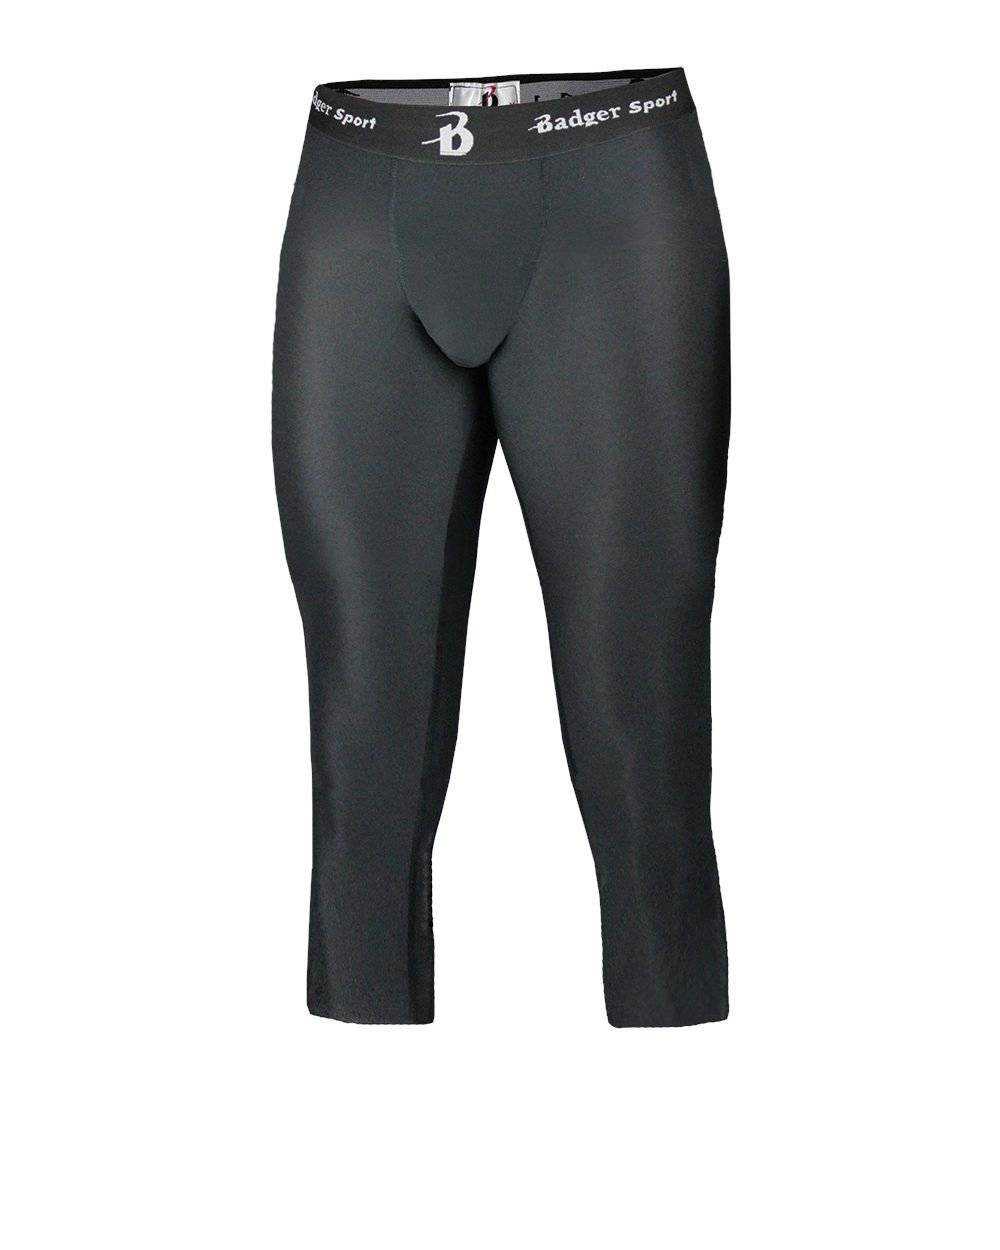 Badger Sport 4611 Calf Length Compression Tight - Black - HIT a Double - 1